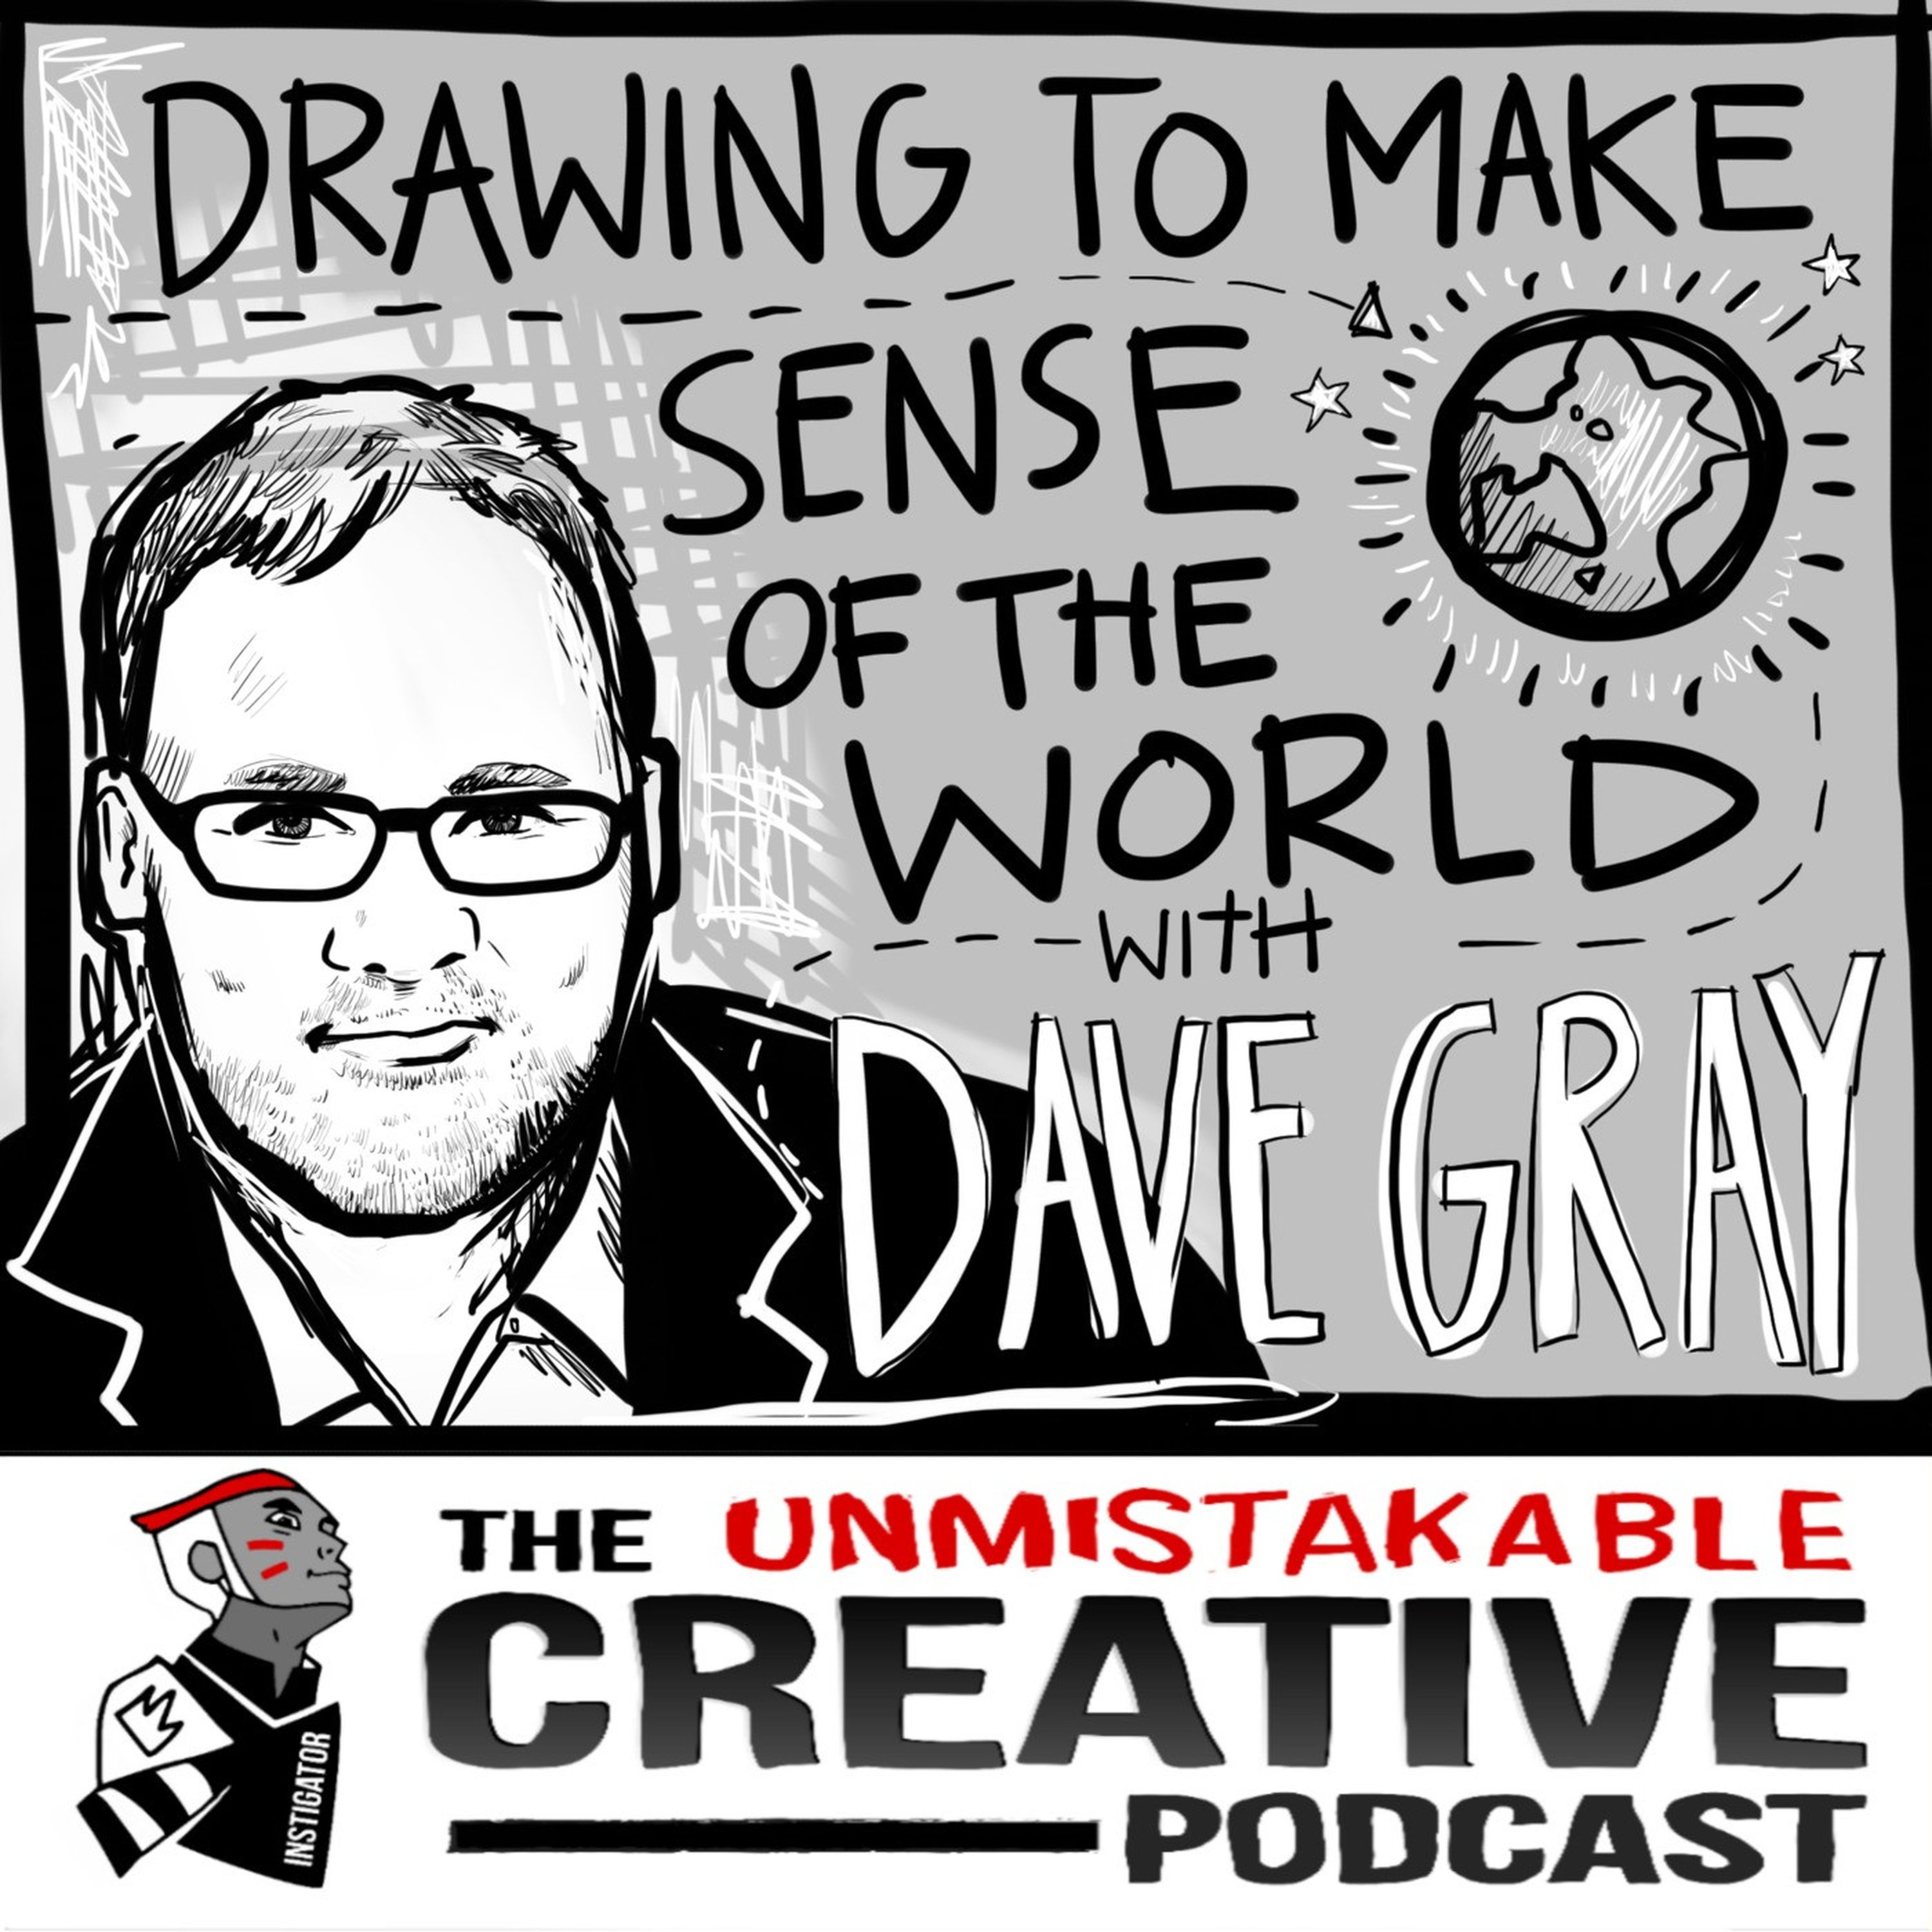 Drawing to Make Sense of the World with Dave Gray